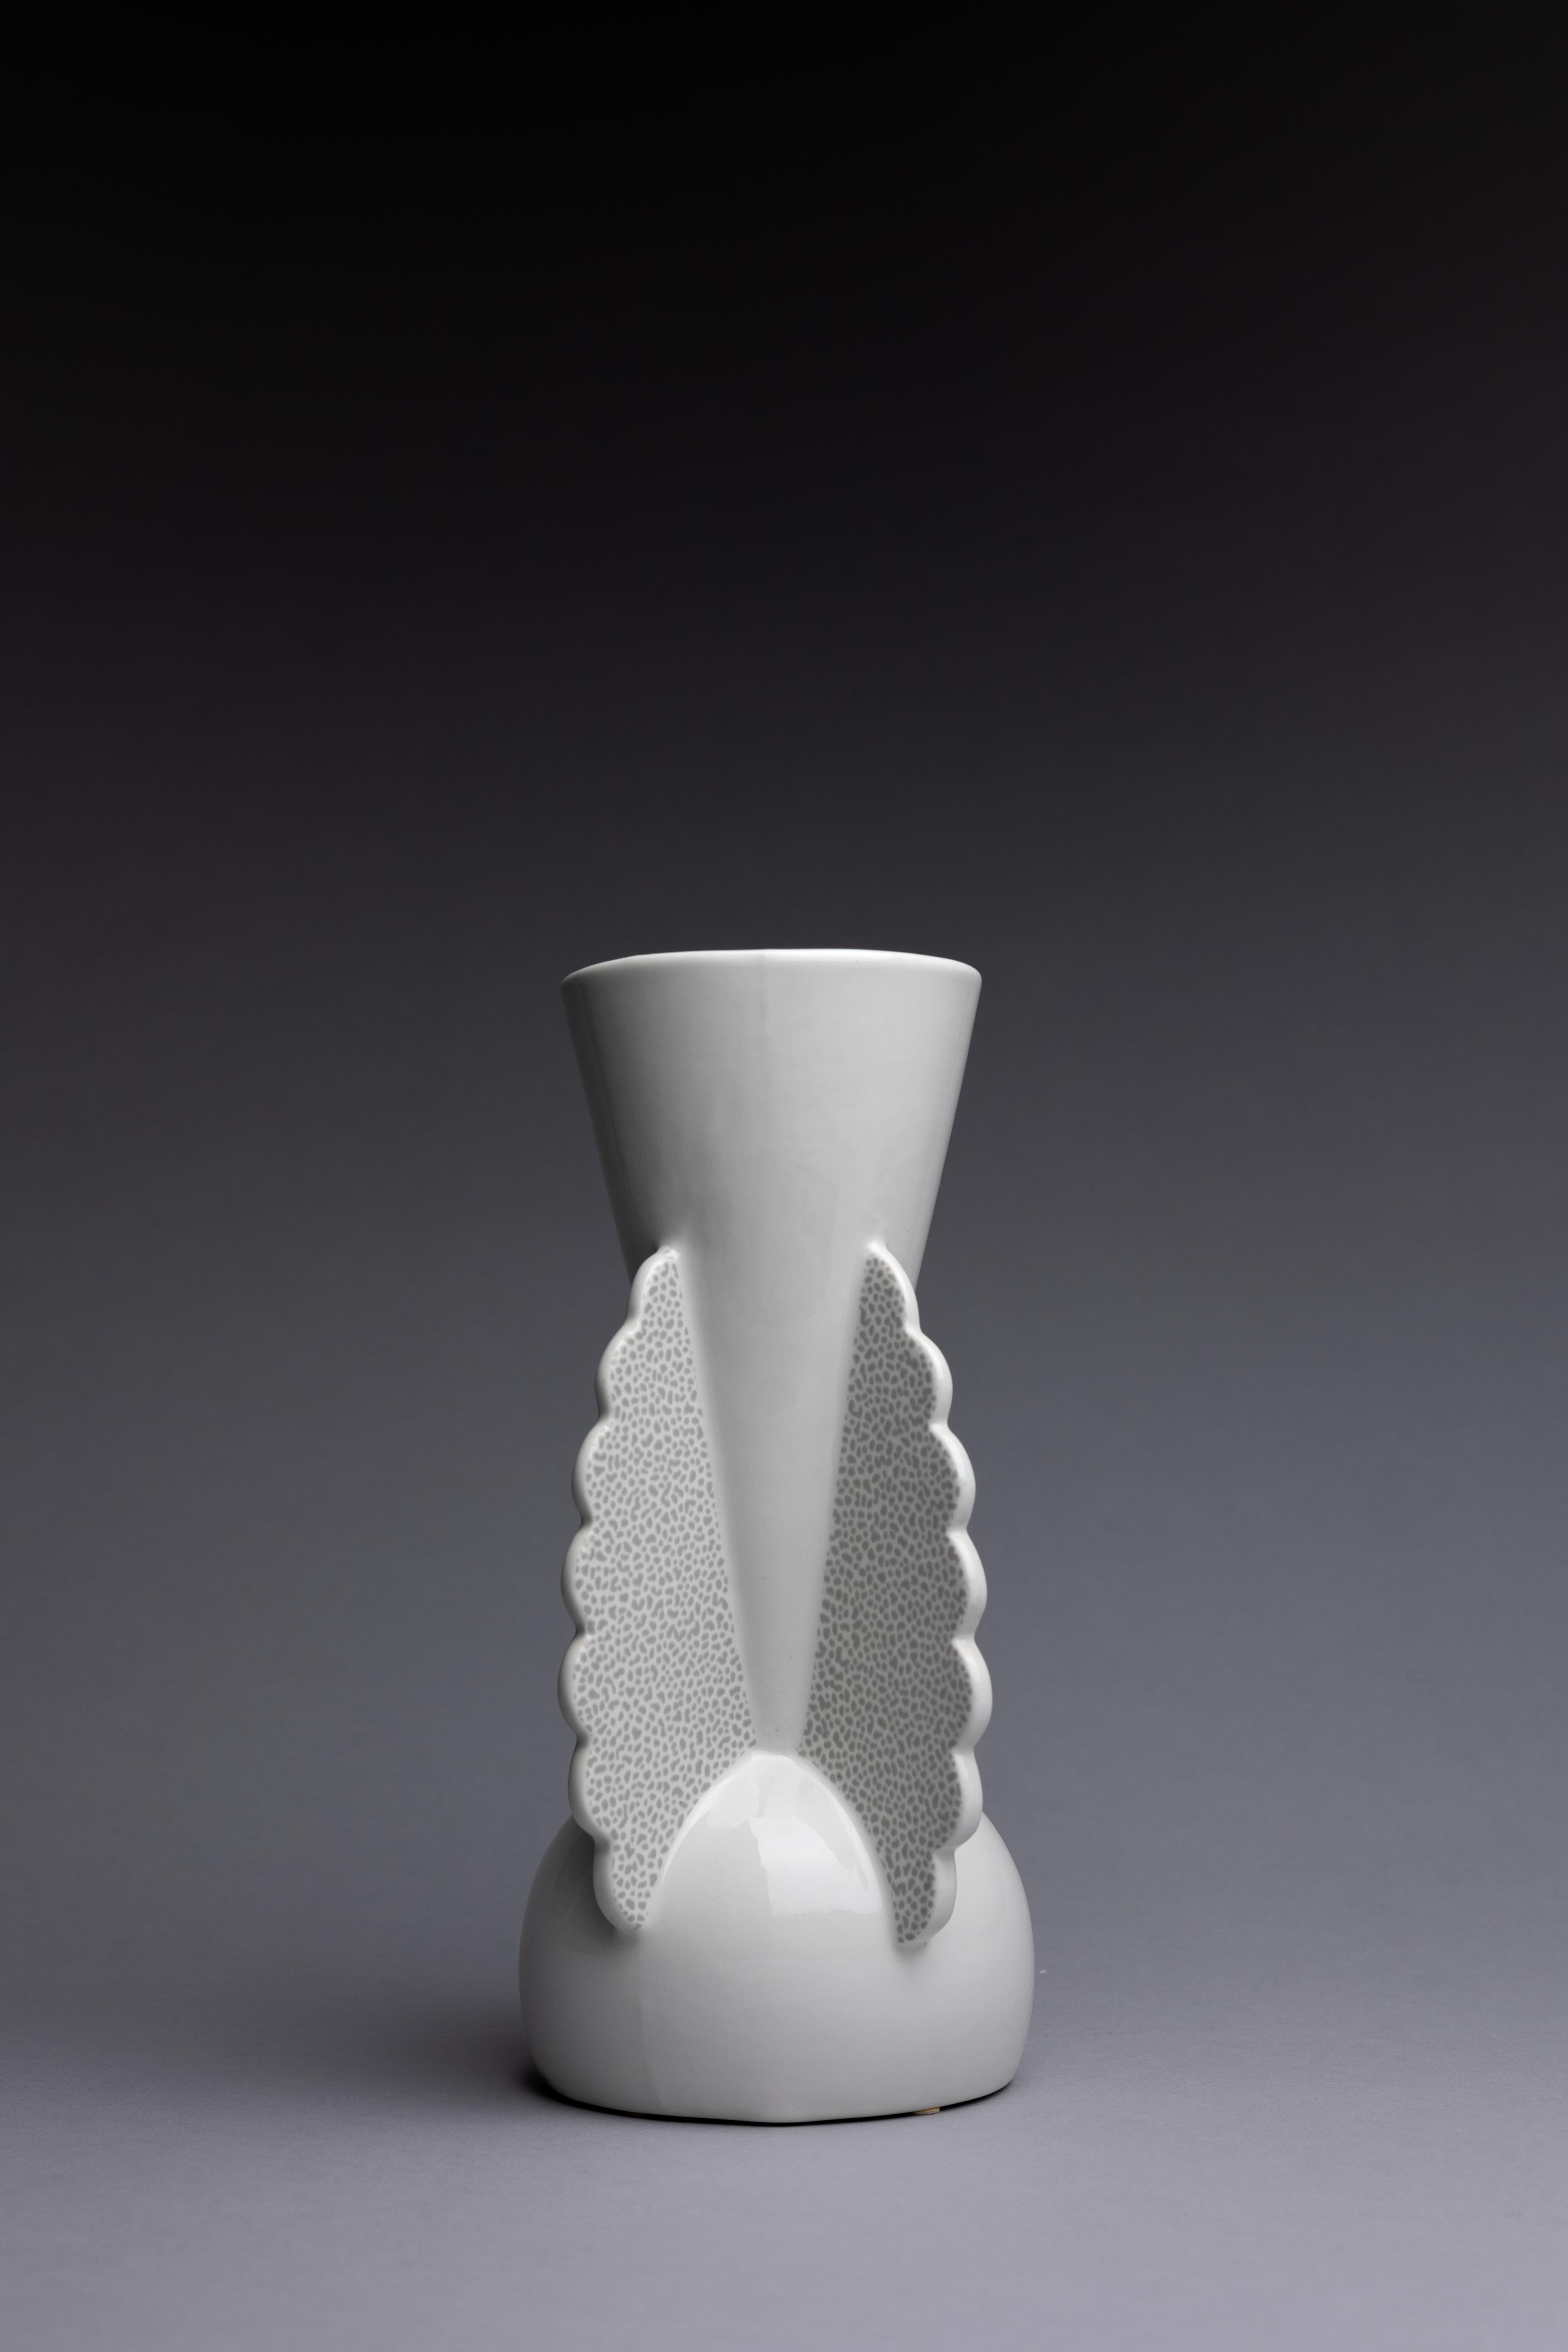 This Matteo Thun Vase was created in the 1980s Memphis style. The porcelain vase’s exaggerated size and details point to the movement’s irreverence for traditional, or even functional, design.

The Memphis Group’s playful approach to design is